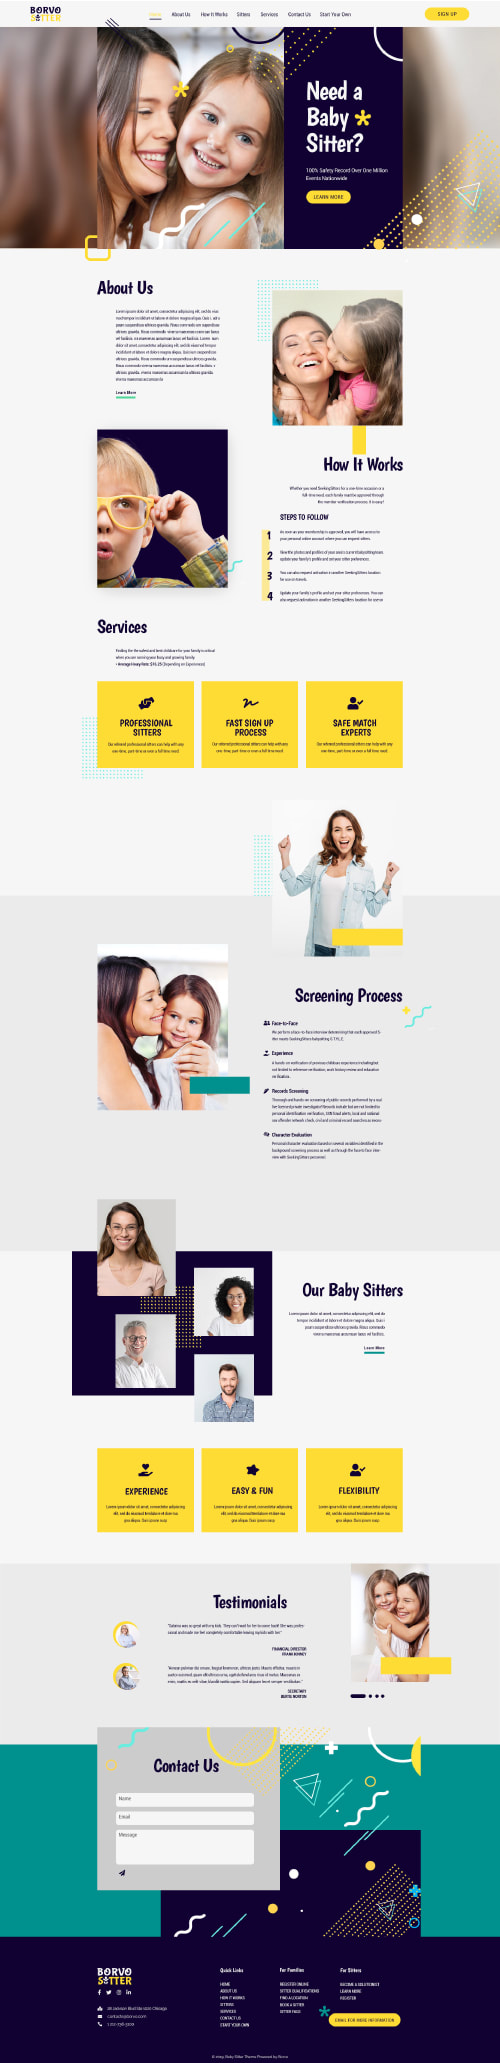 The JPcreative_Landing Page Design_Baby sitting